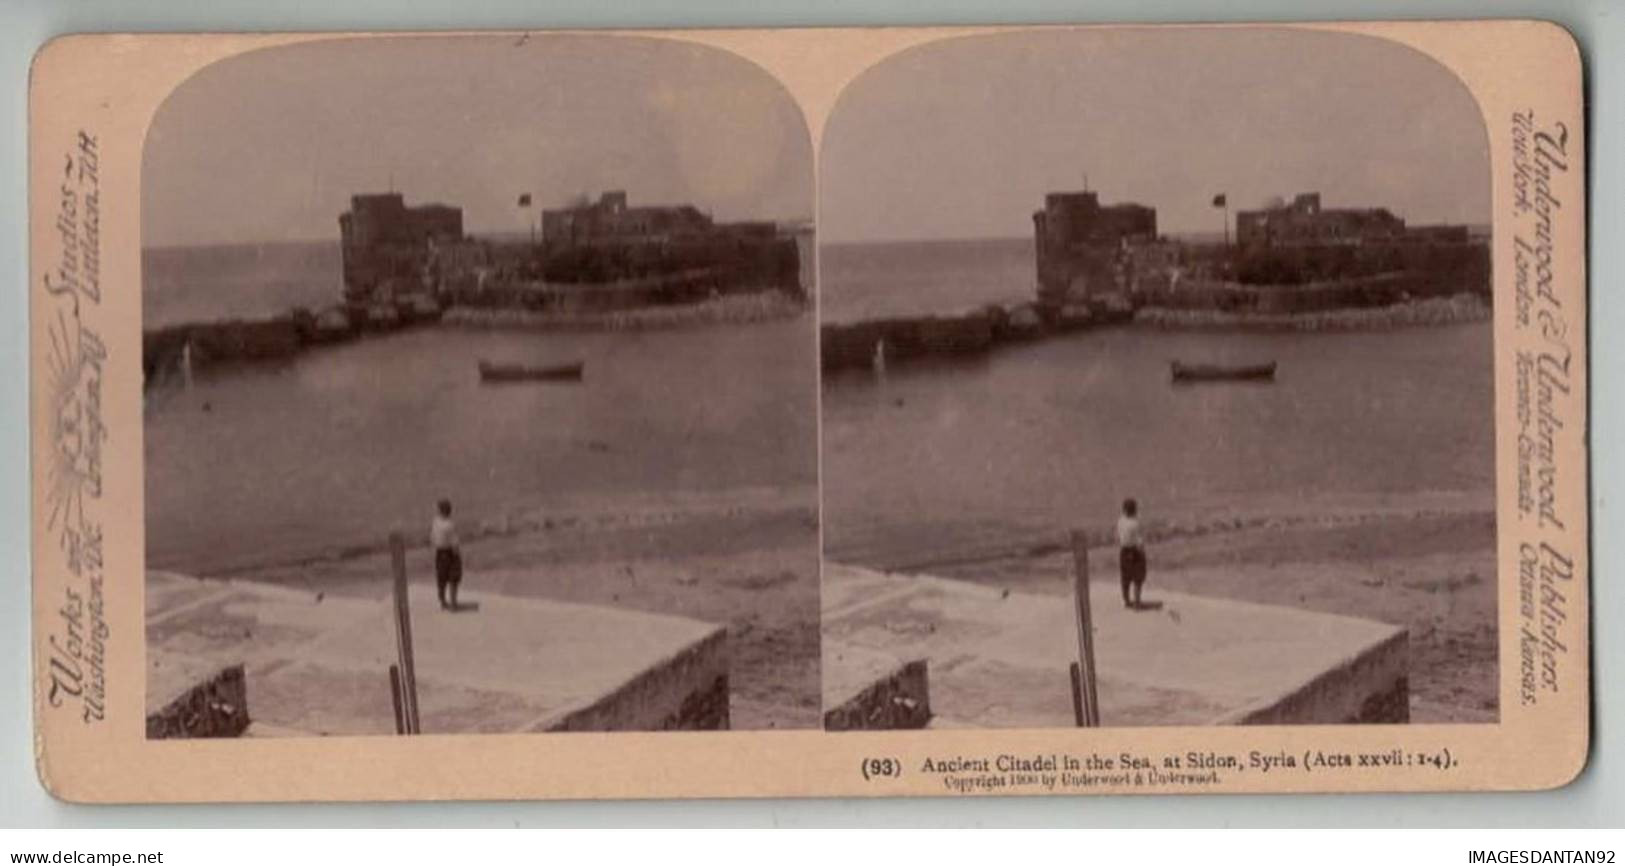 SYRIE LIBAN #PP1303 SYRIA SIDON ANCIENNE CITADELLE DANS LA MER 1899 - Stereo-Photographie